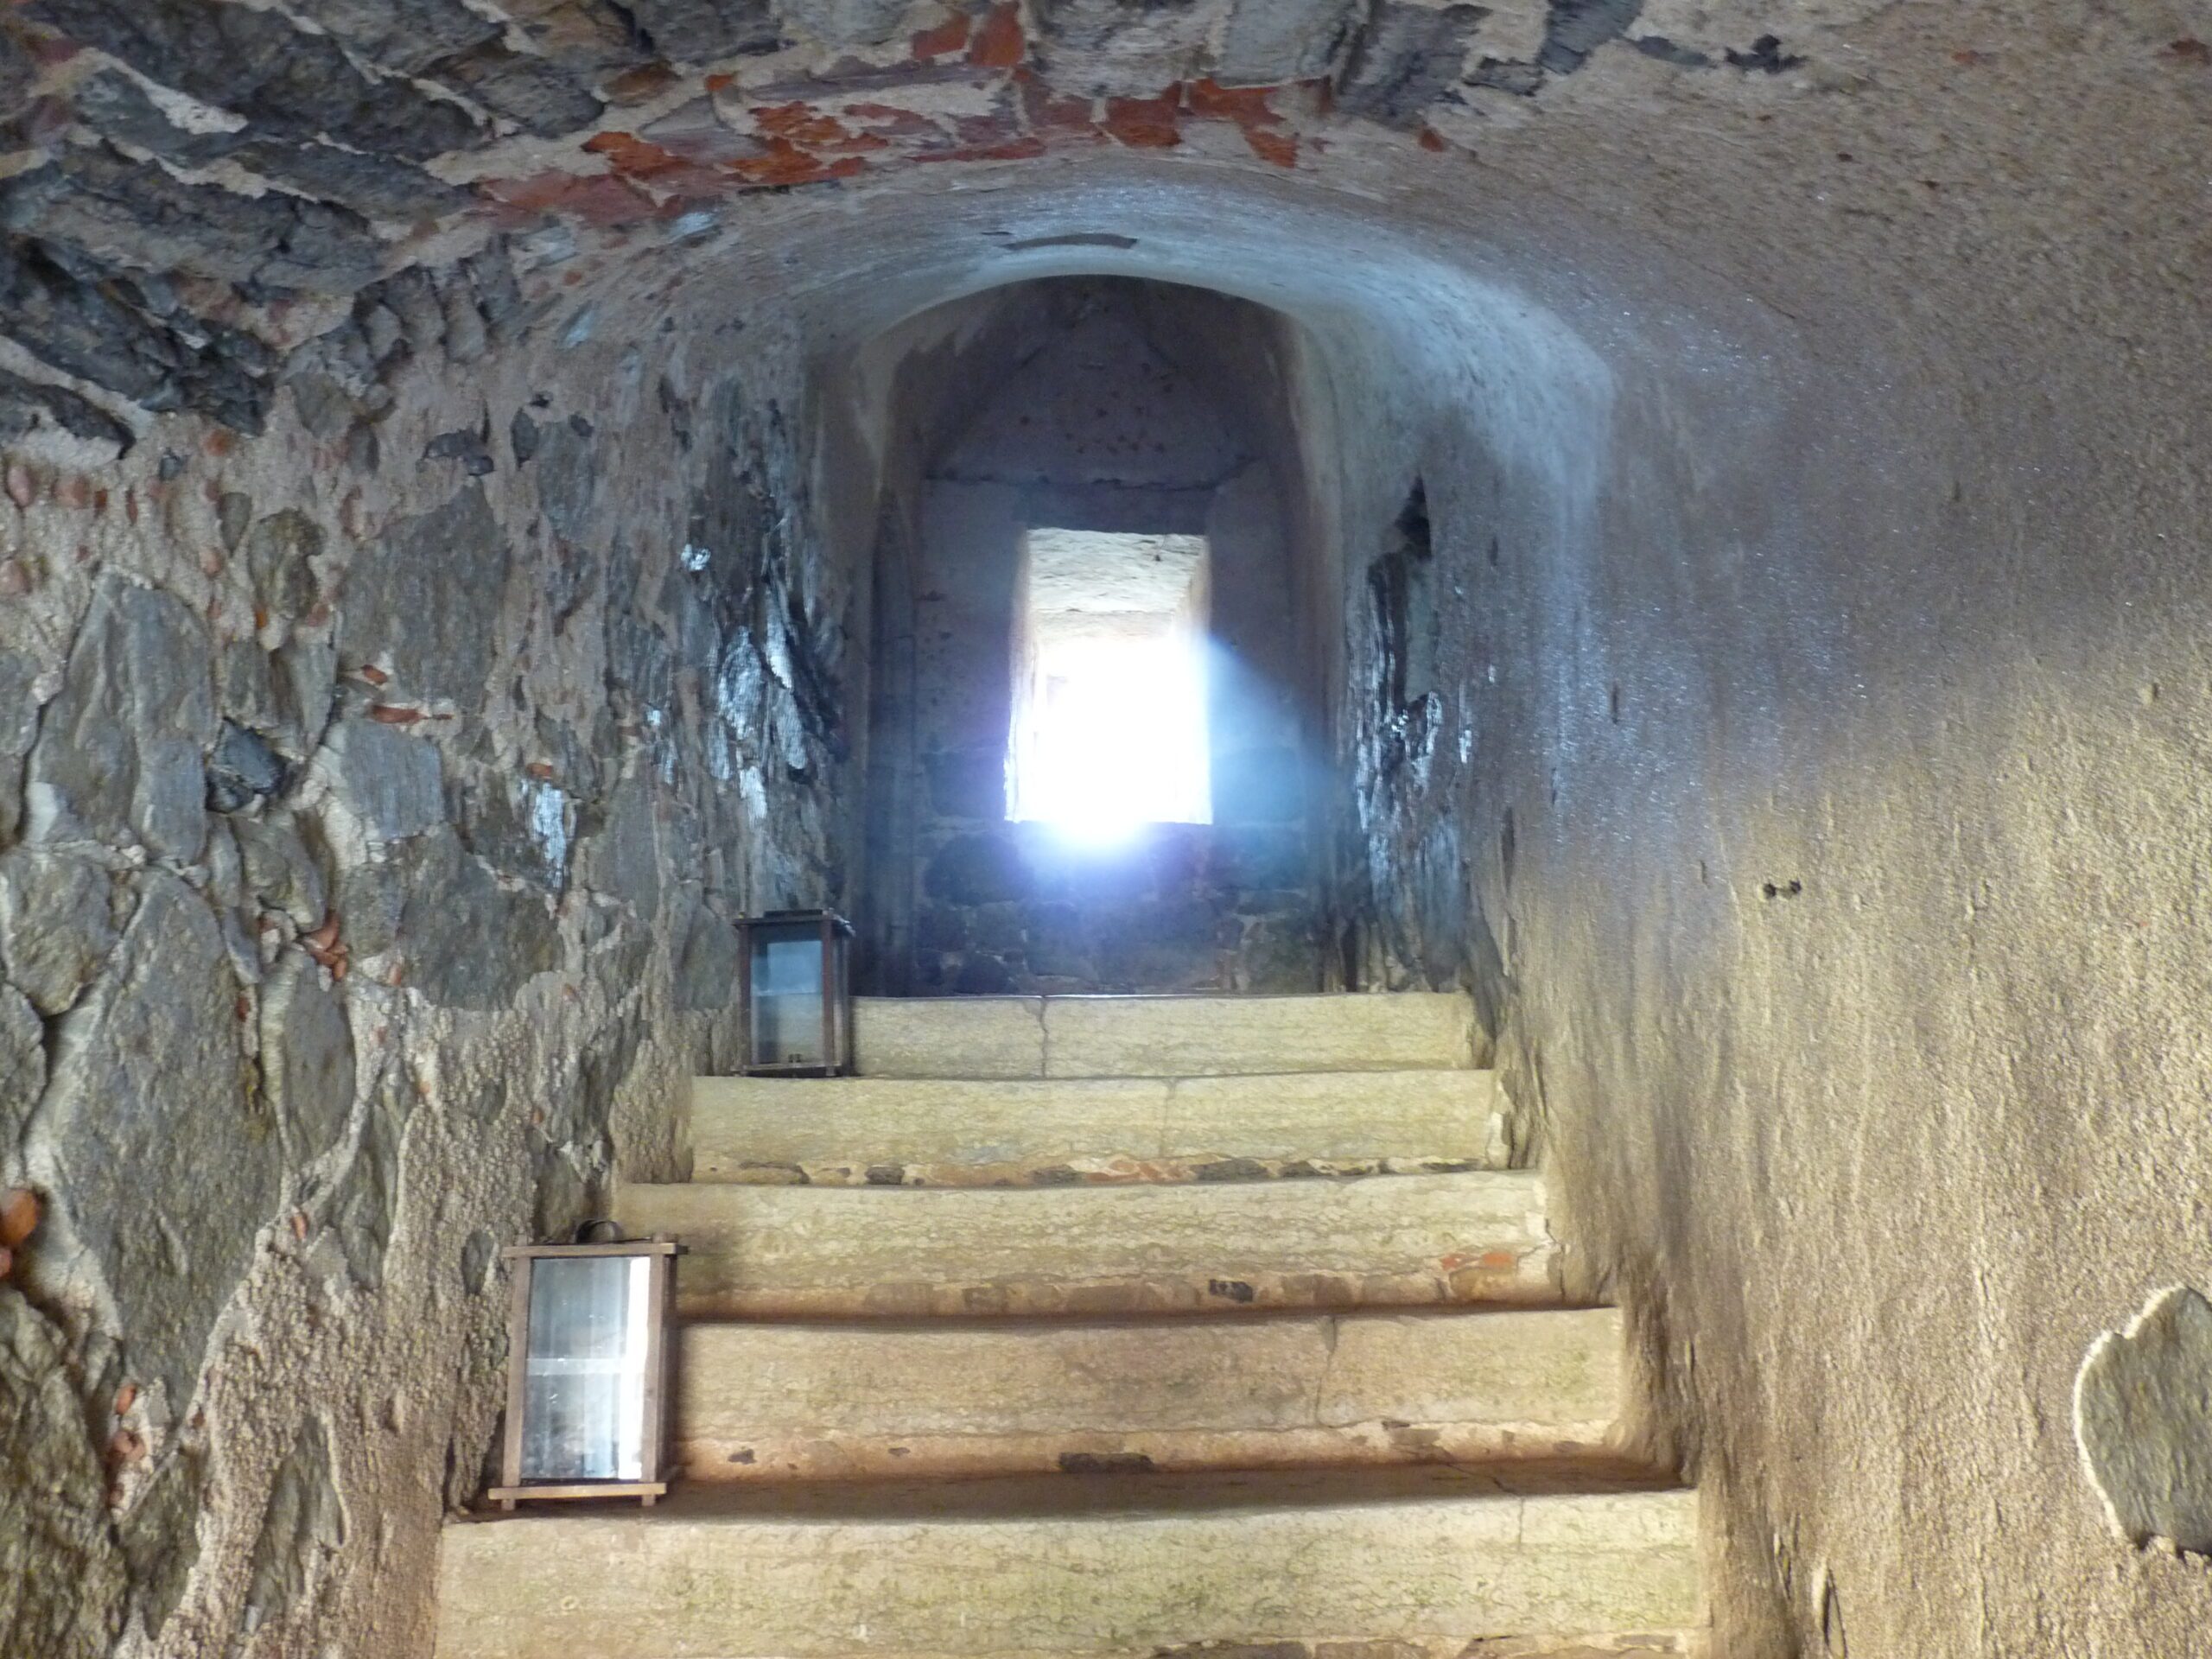 Here you can see the stairs up to the first floor with lanterns. A window can be seen in the center of the picture.